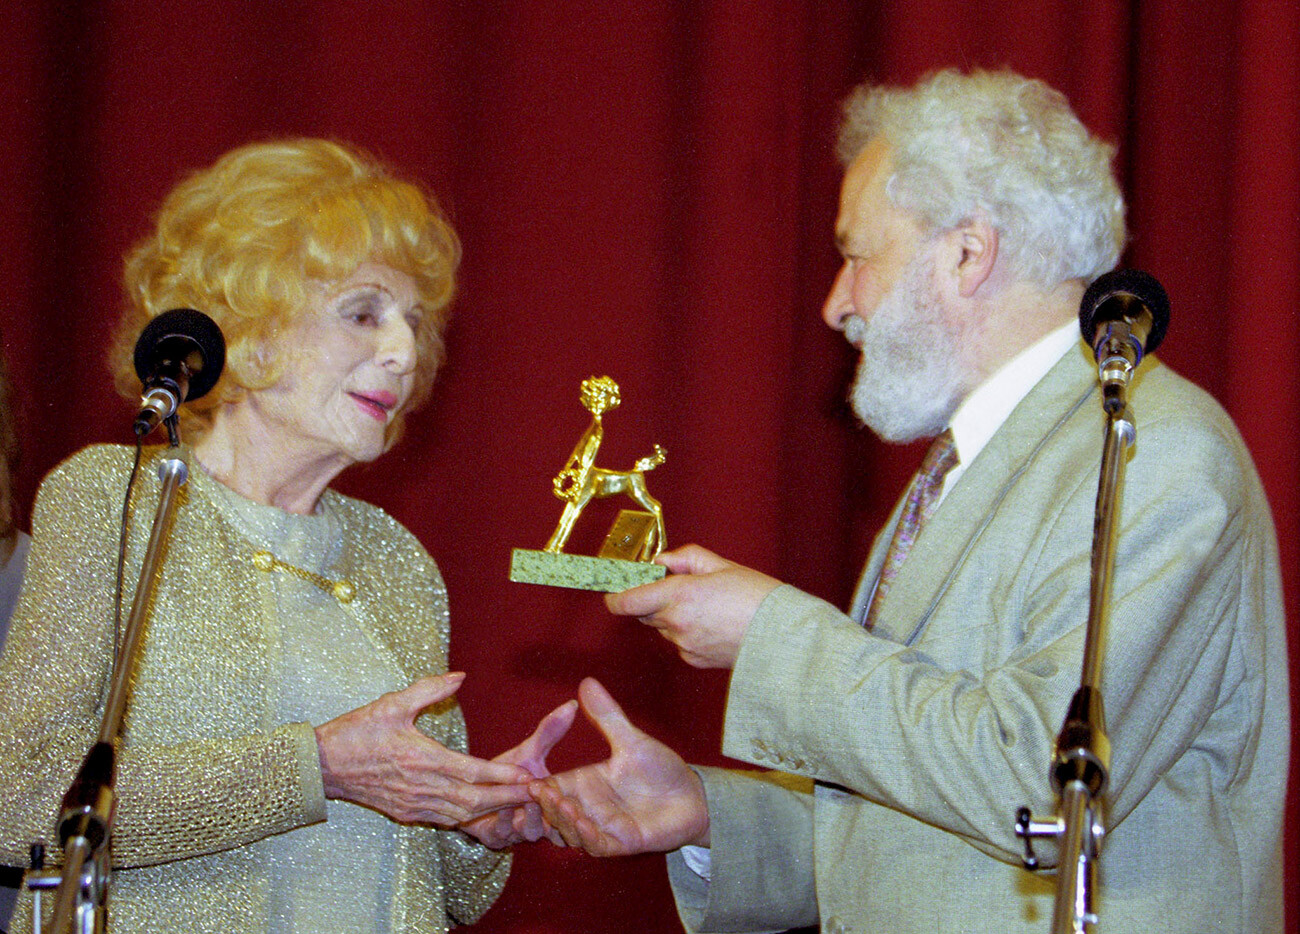 Leni Riefenstahl at her 98 being awarded with a prize for her contribution to the cinema industry in St. Petersburg